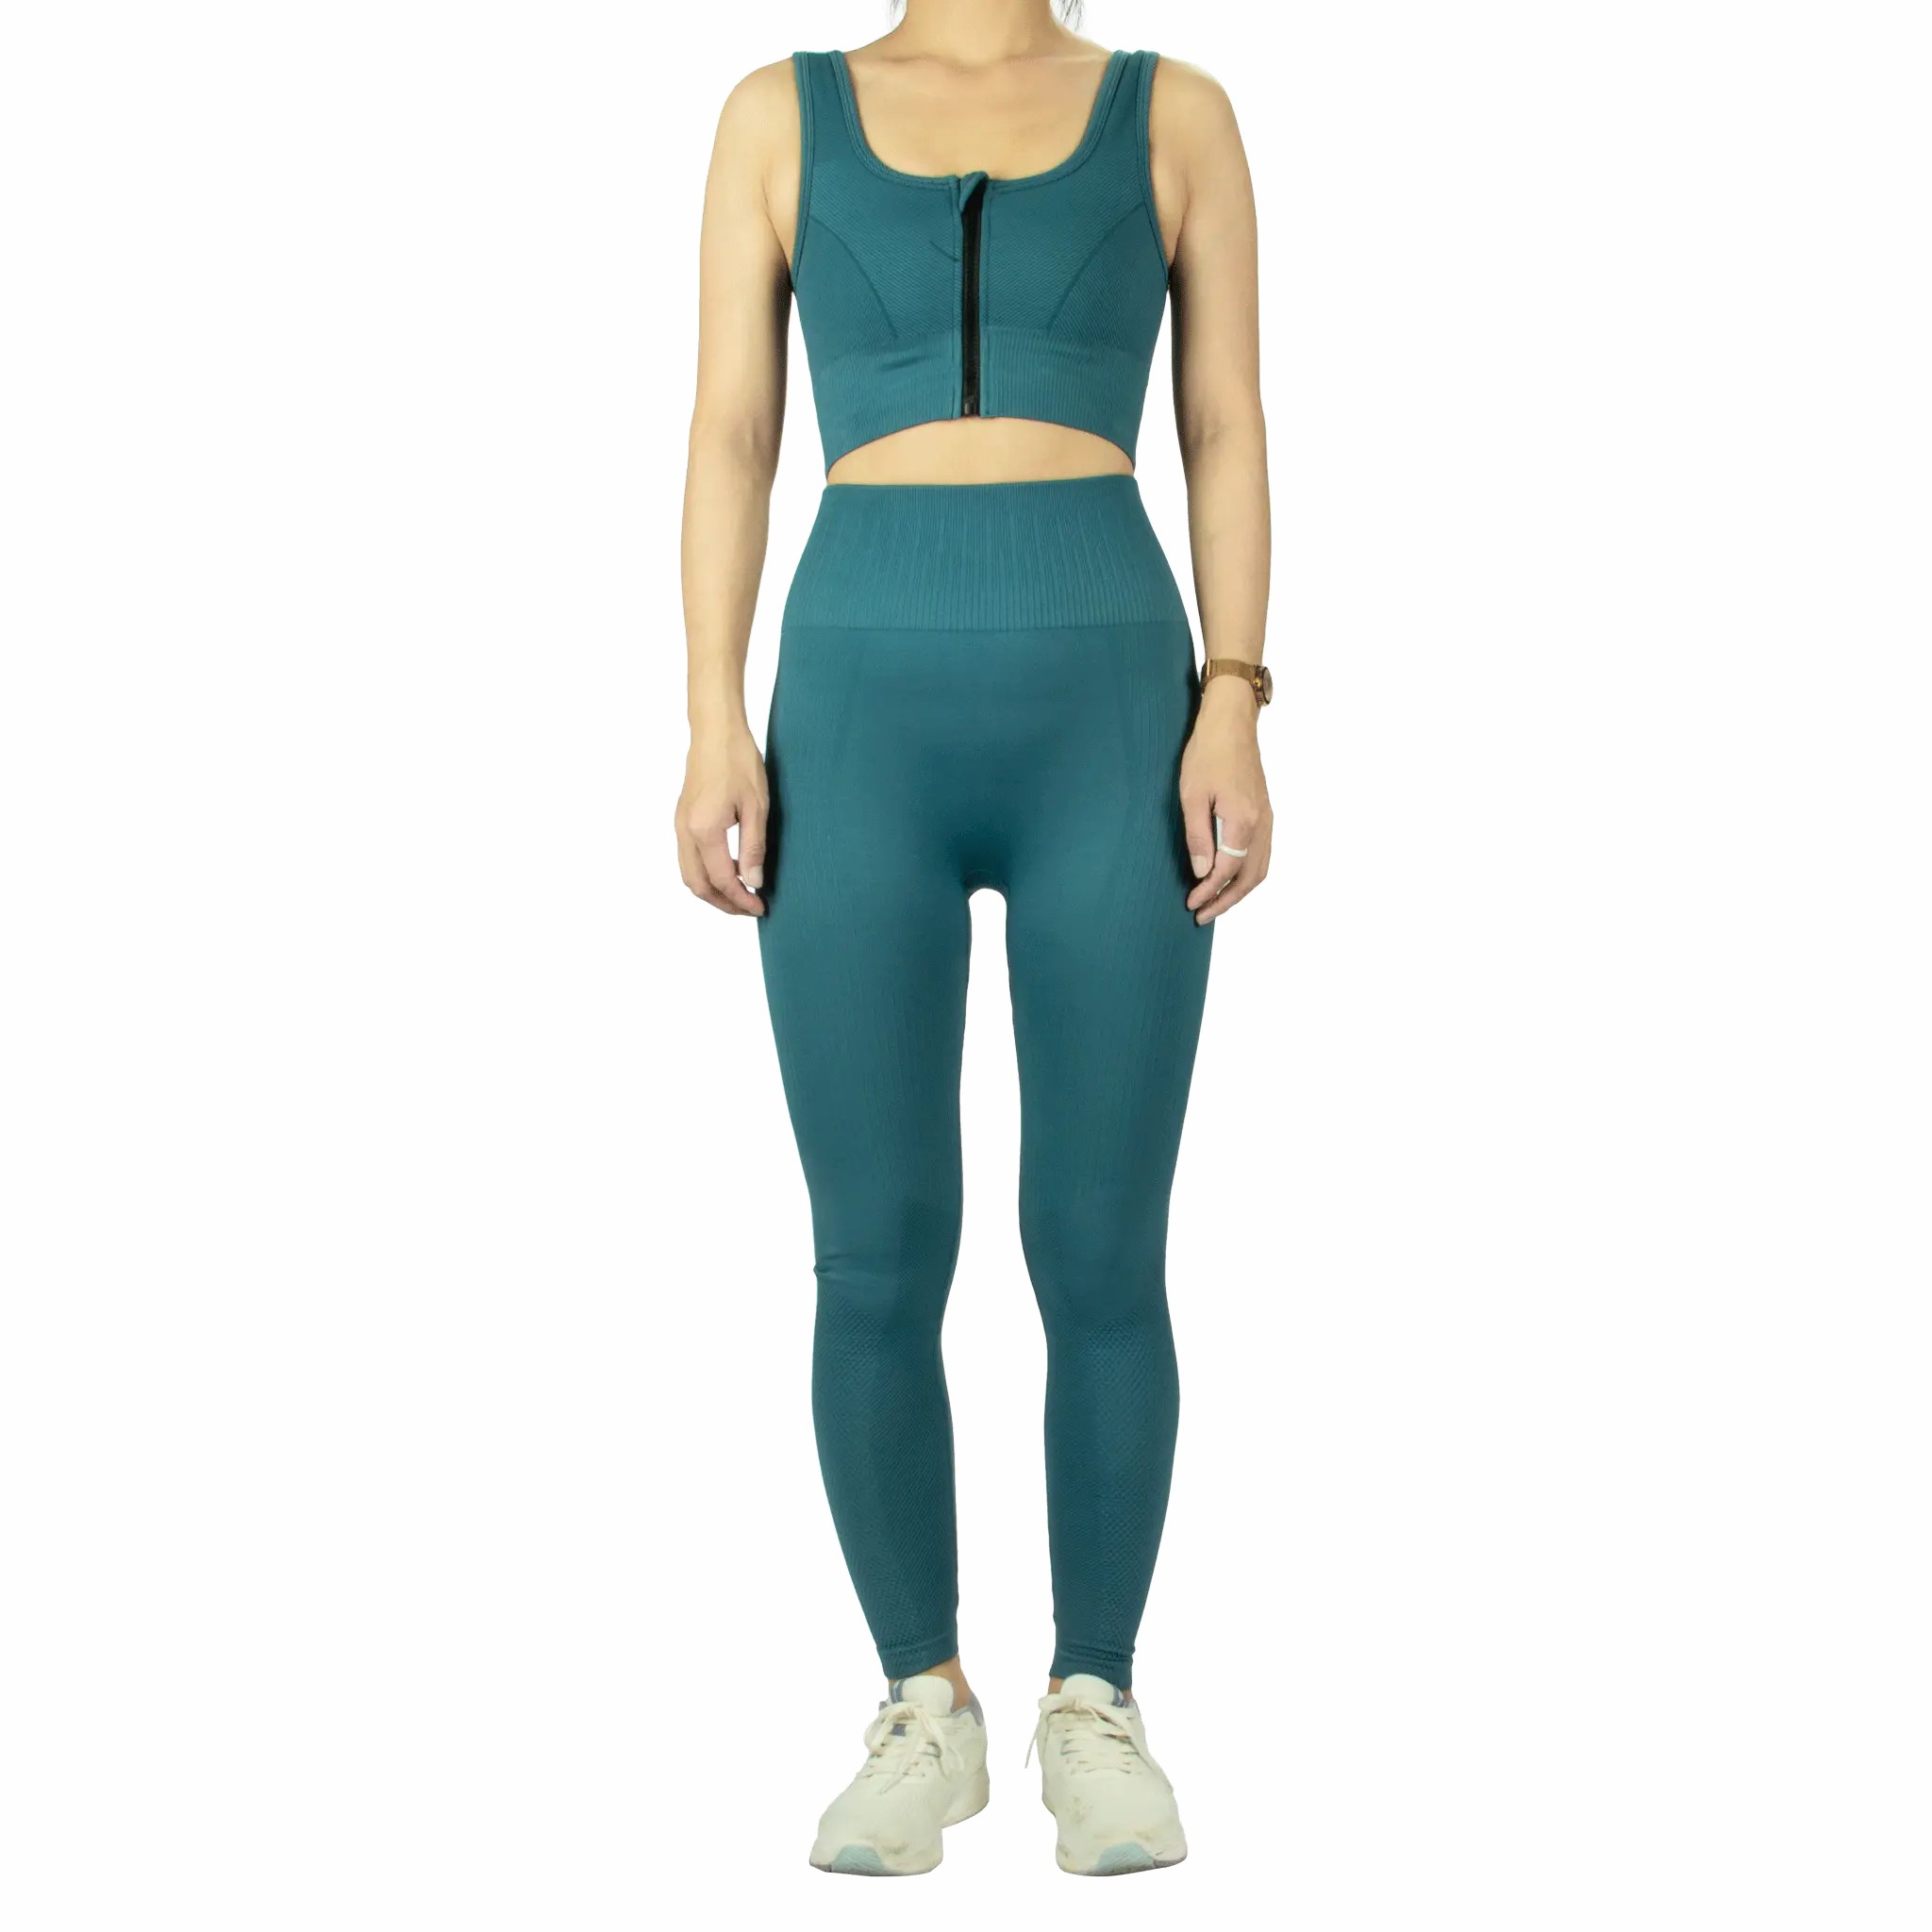 Finding the Right Yoga Wear